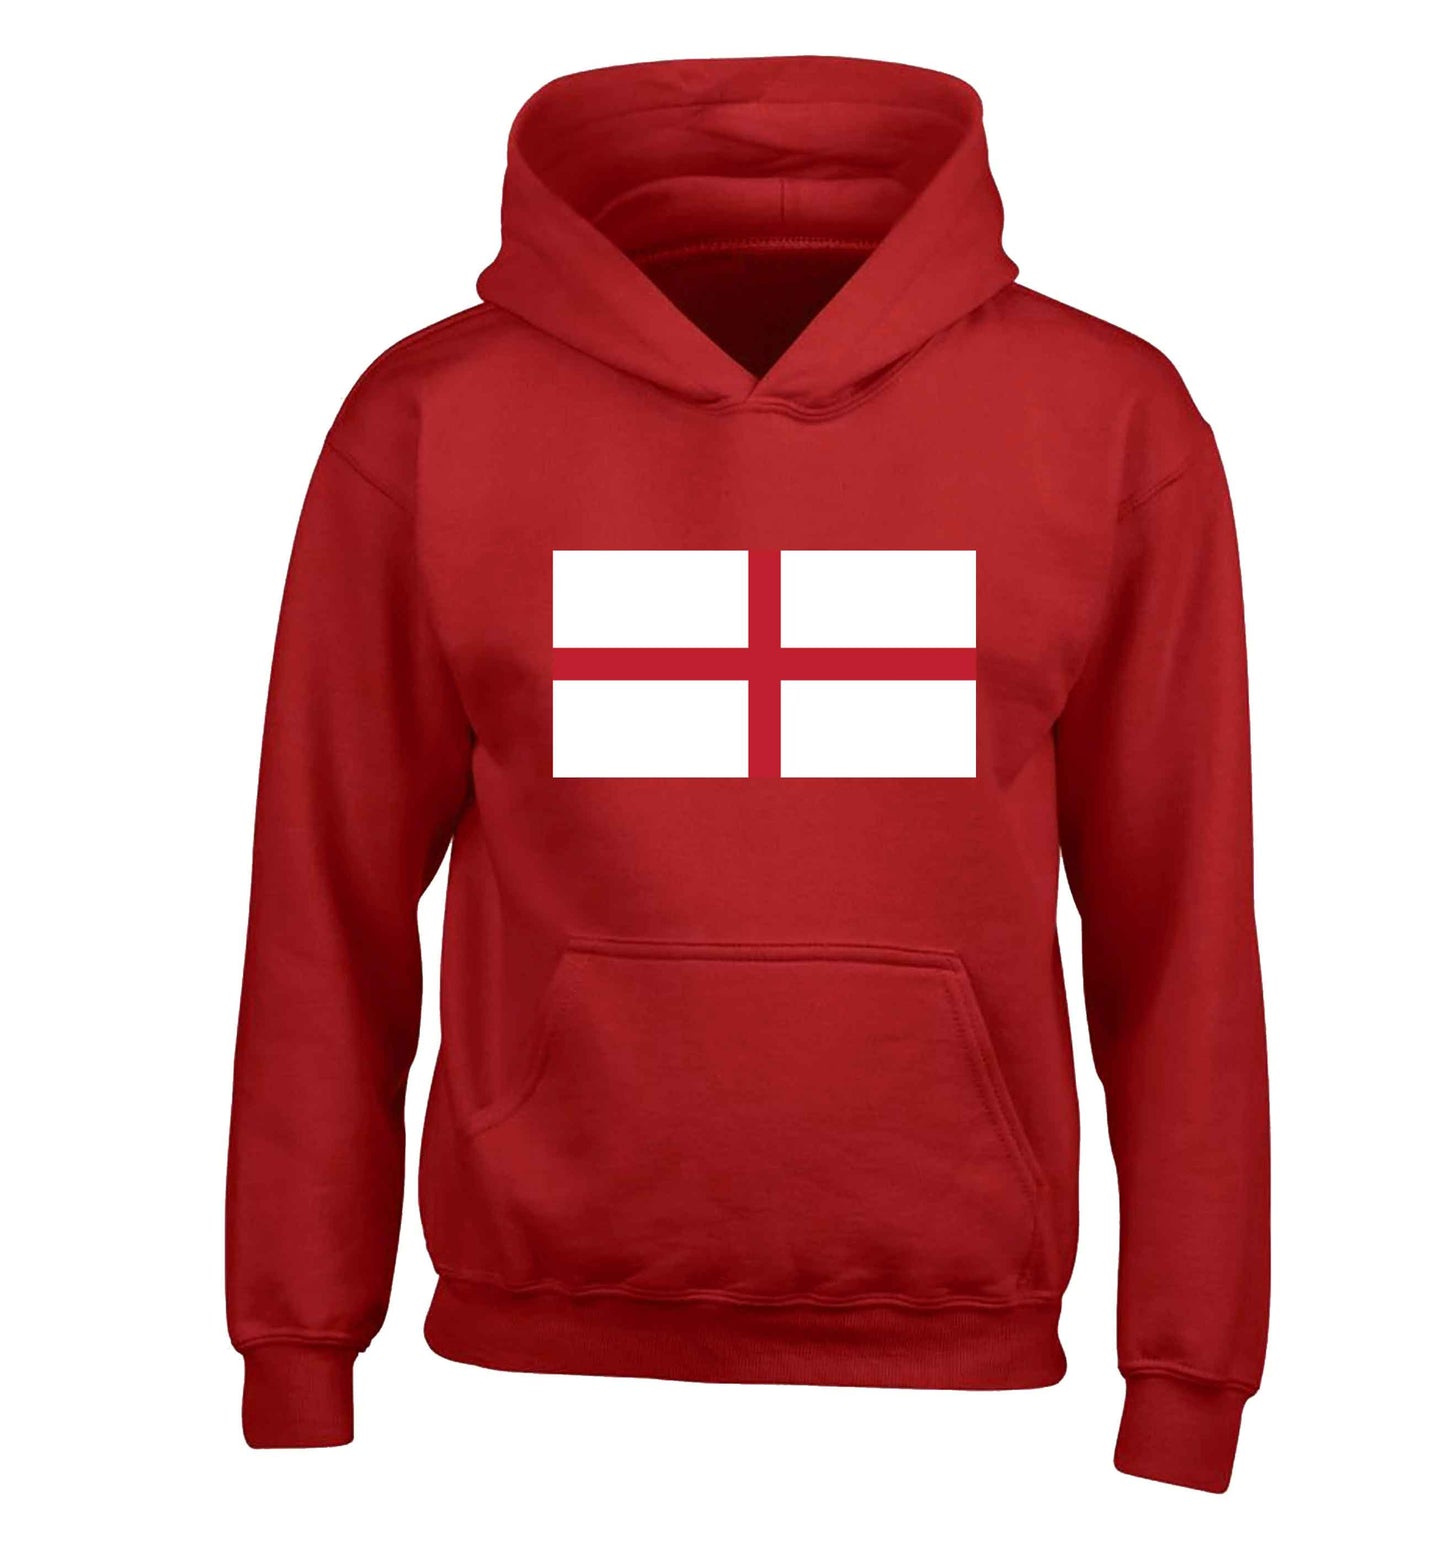 England Flag children's red hoodie 12-13 Years